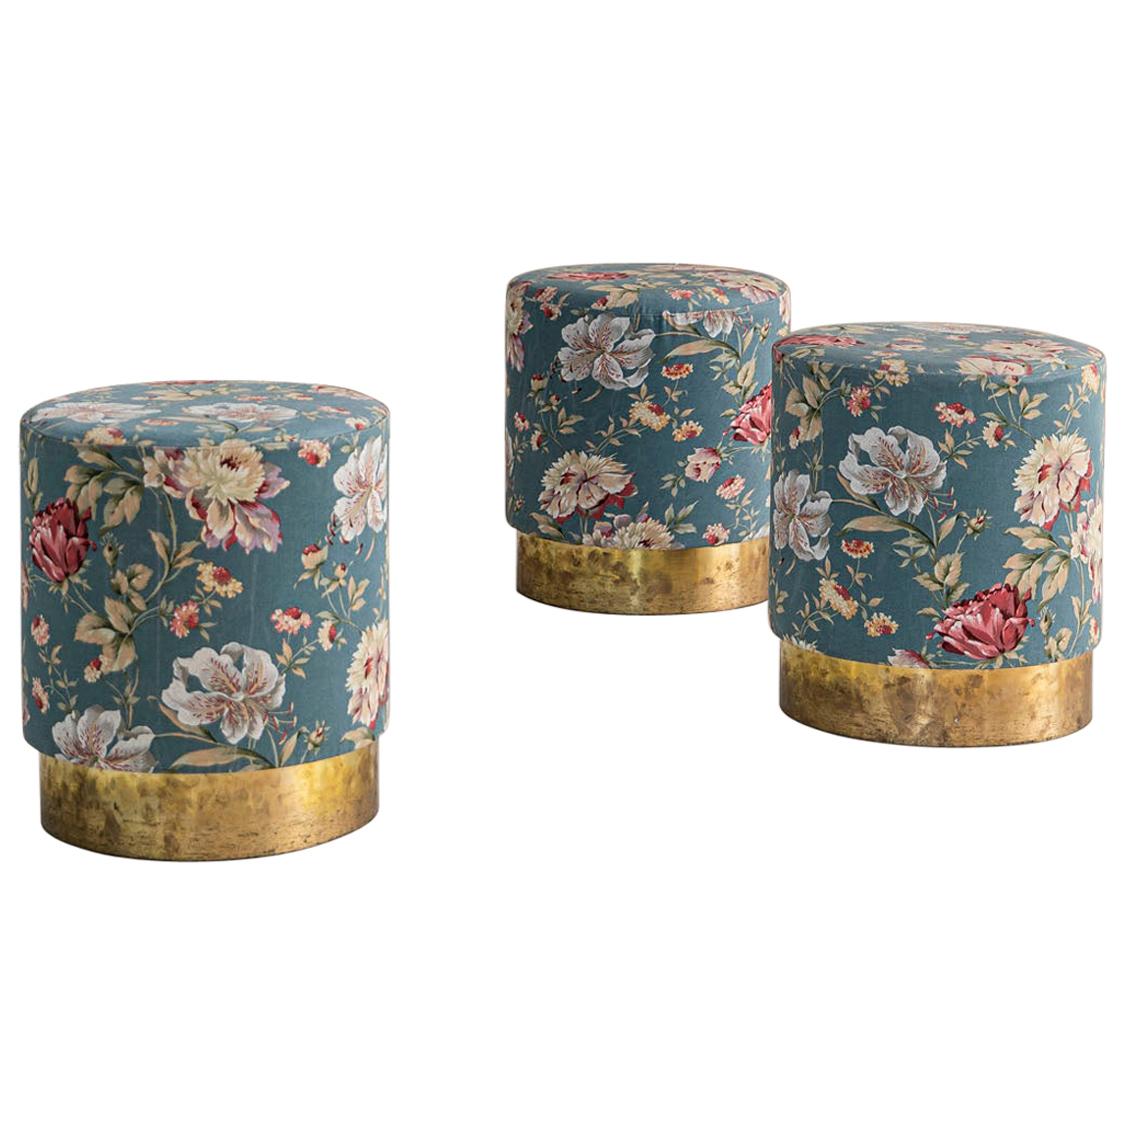 Set of Three Stools, Floral Decorated Fabric